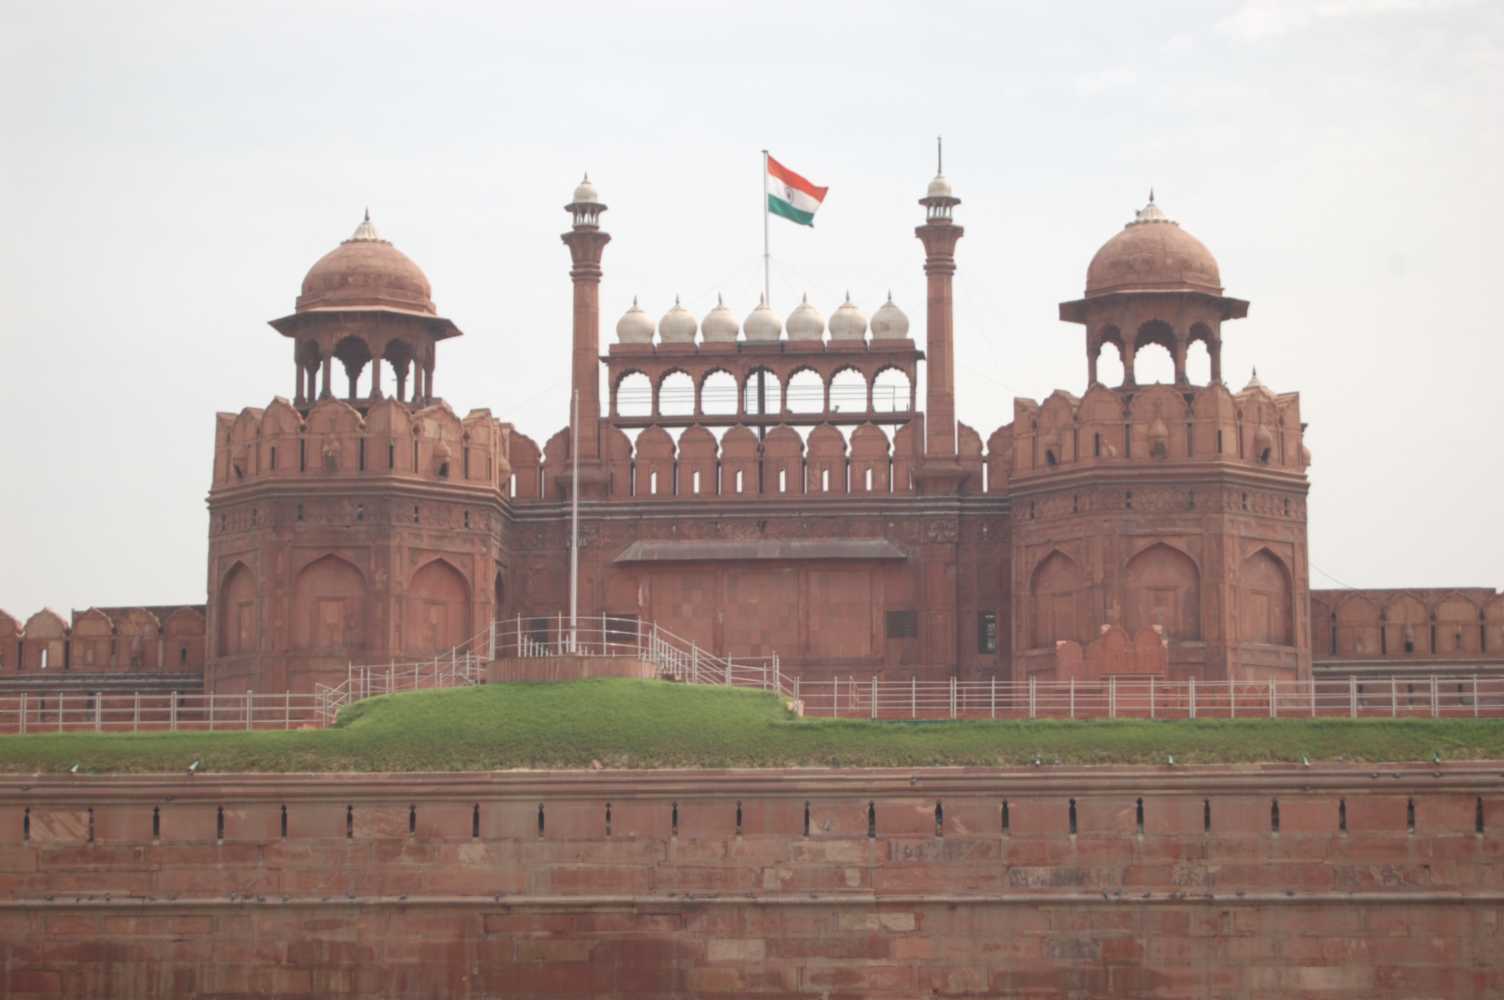 Lal Qila, a.k.a. Red Fort.